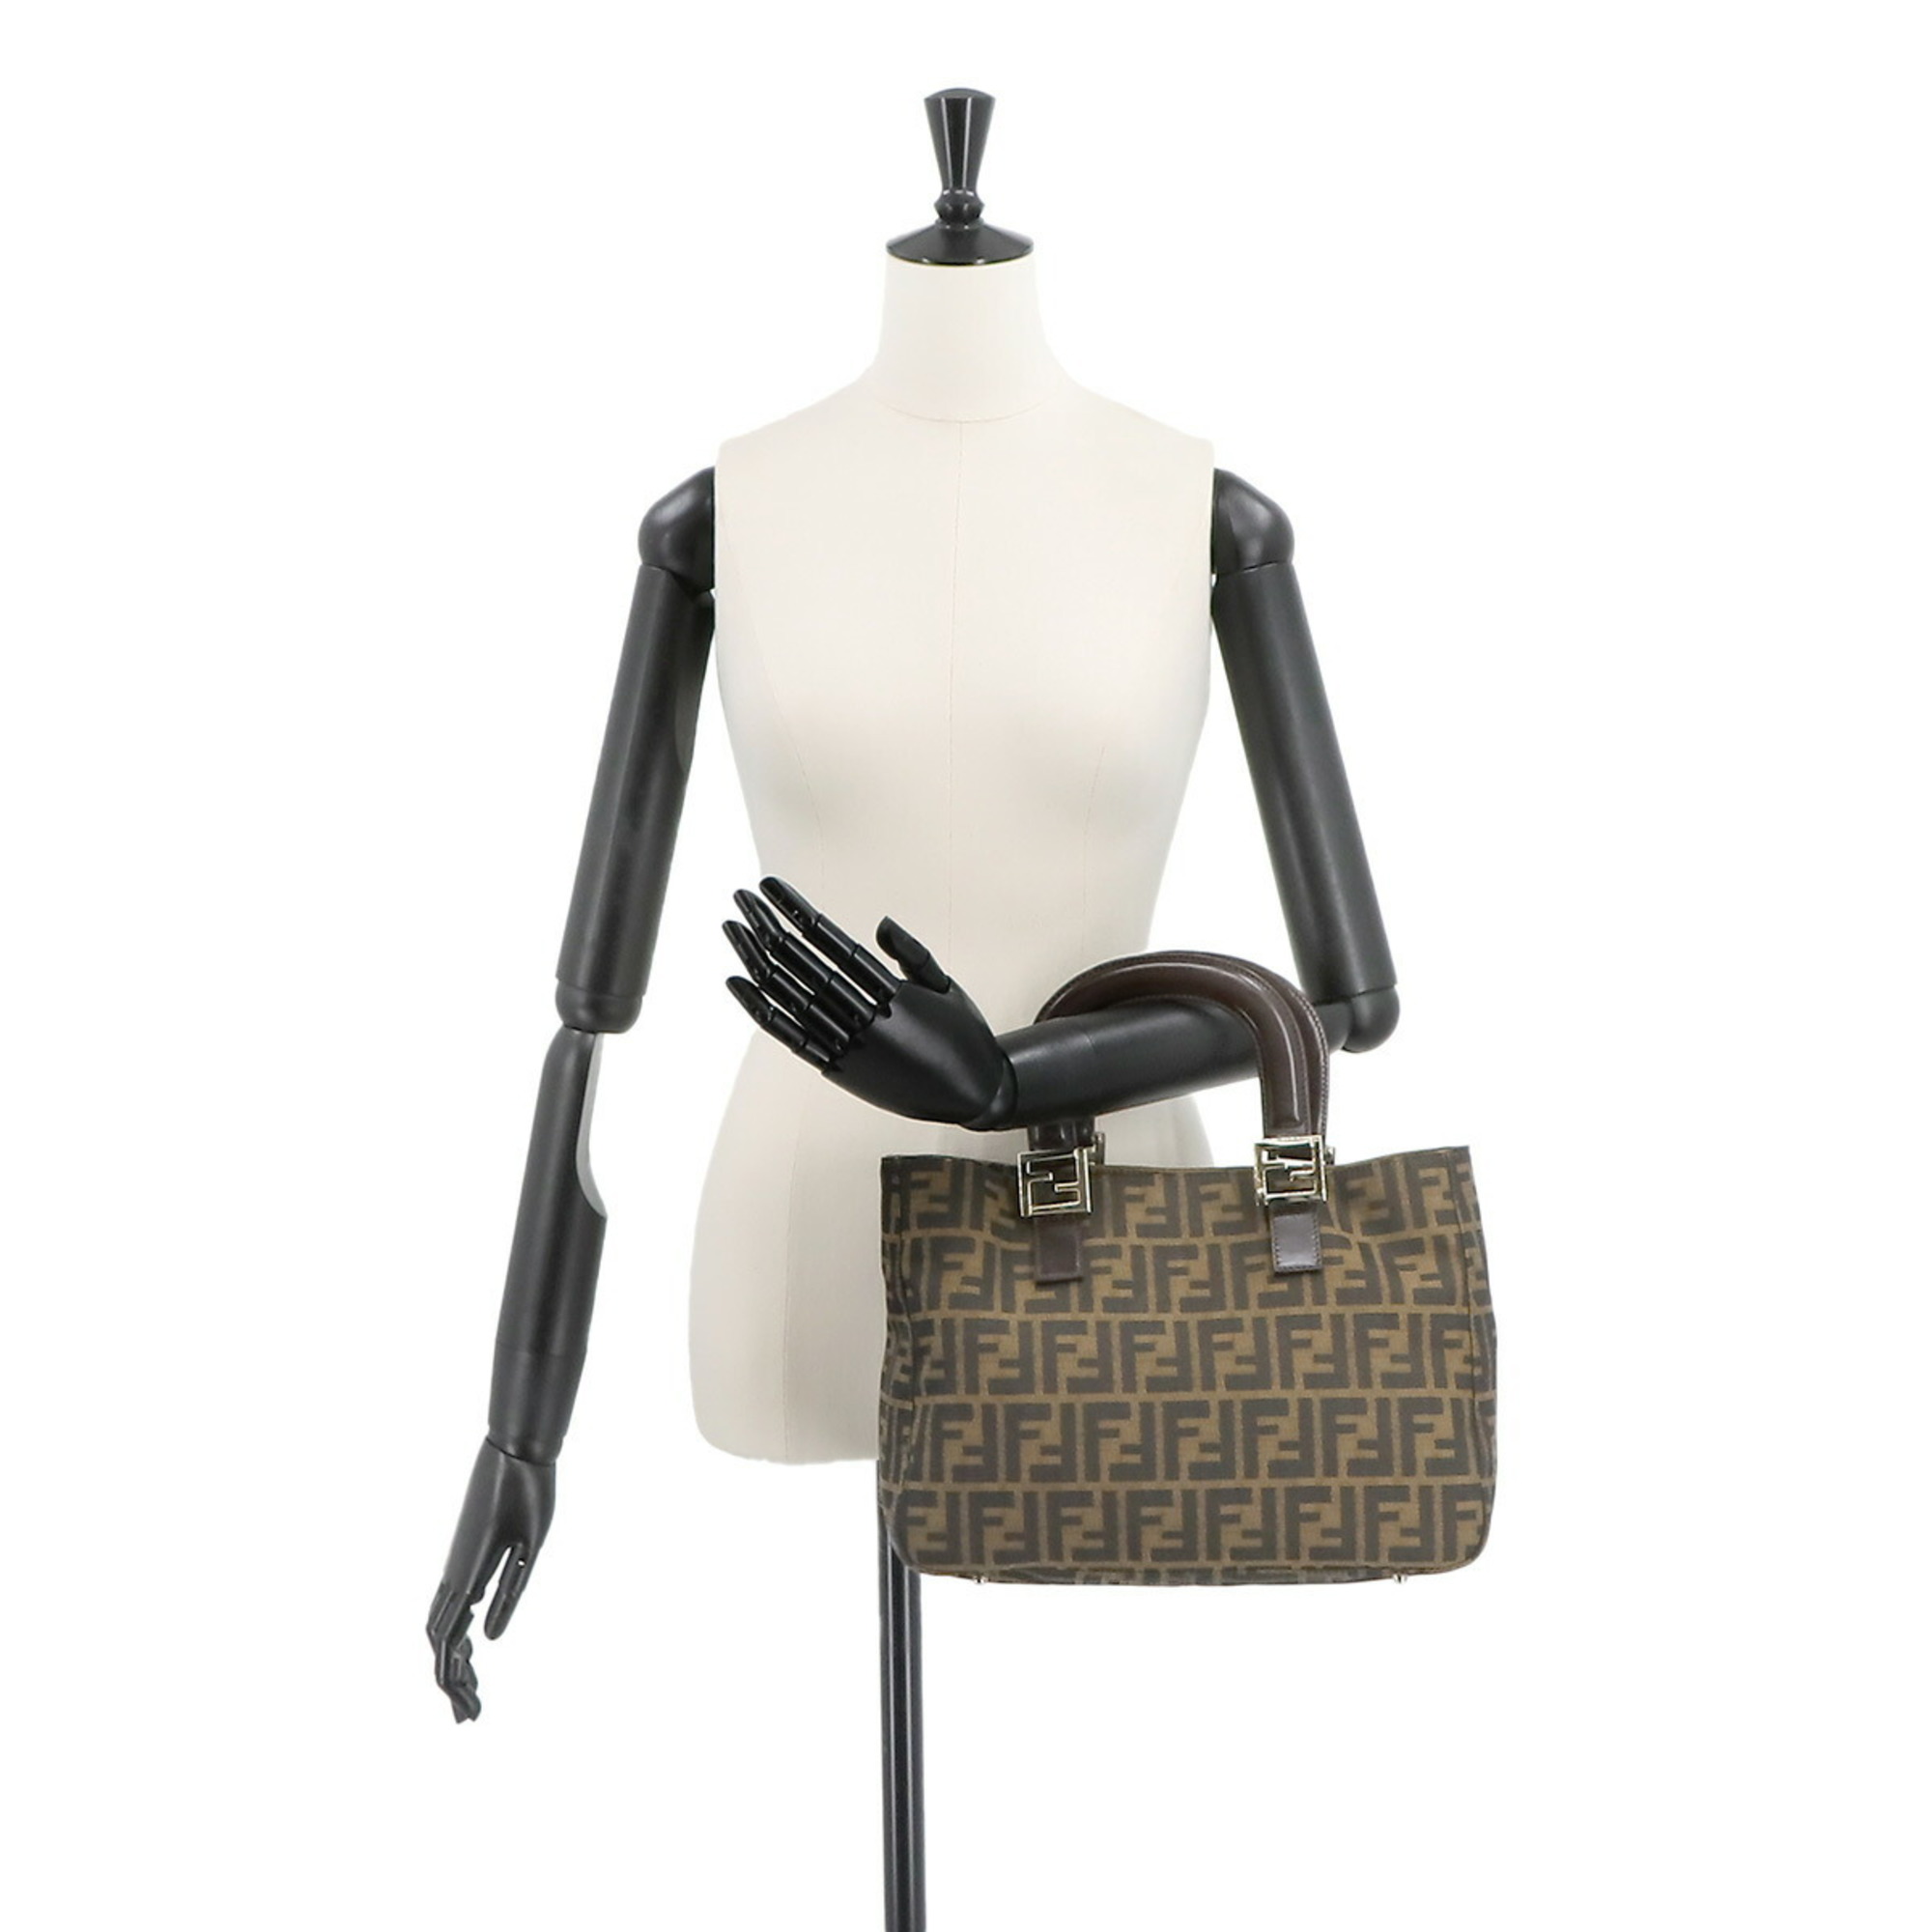 FENDI Zucca Tote Bag in brown and black with pattern leather, 26329 silver hardware